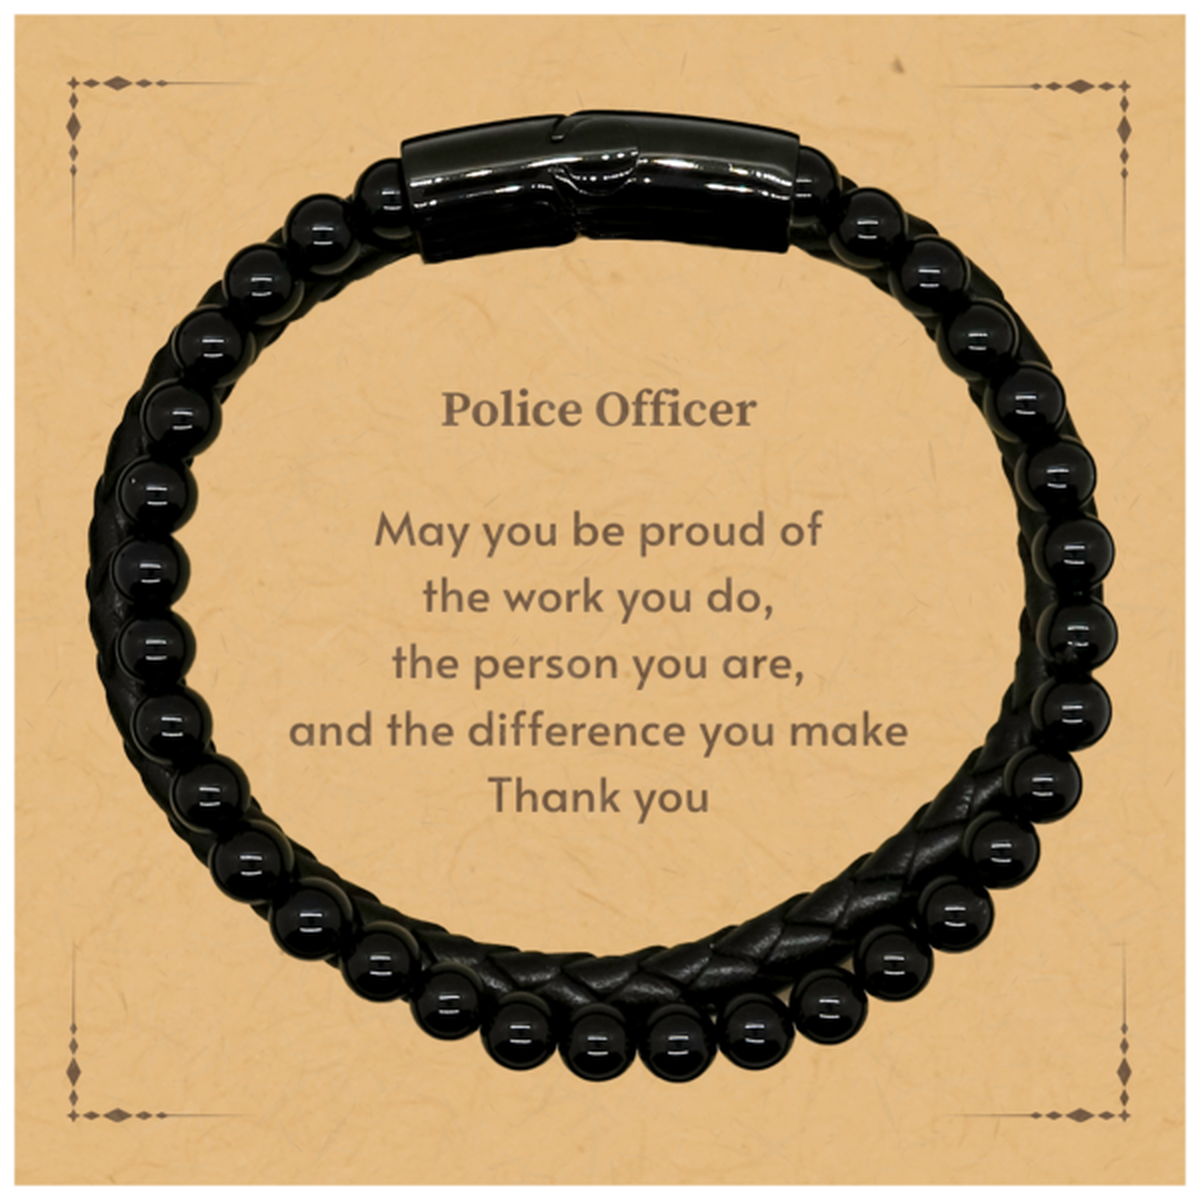 Heartwarming Stone Leather Bracelets Retirement Coworkers Gifts for Police Officer, Police Officer May You be proud of the work you do, the person you are Gifts for Boss Men Women Friends